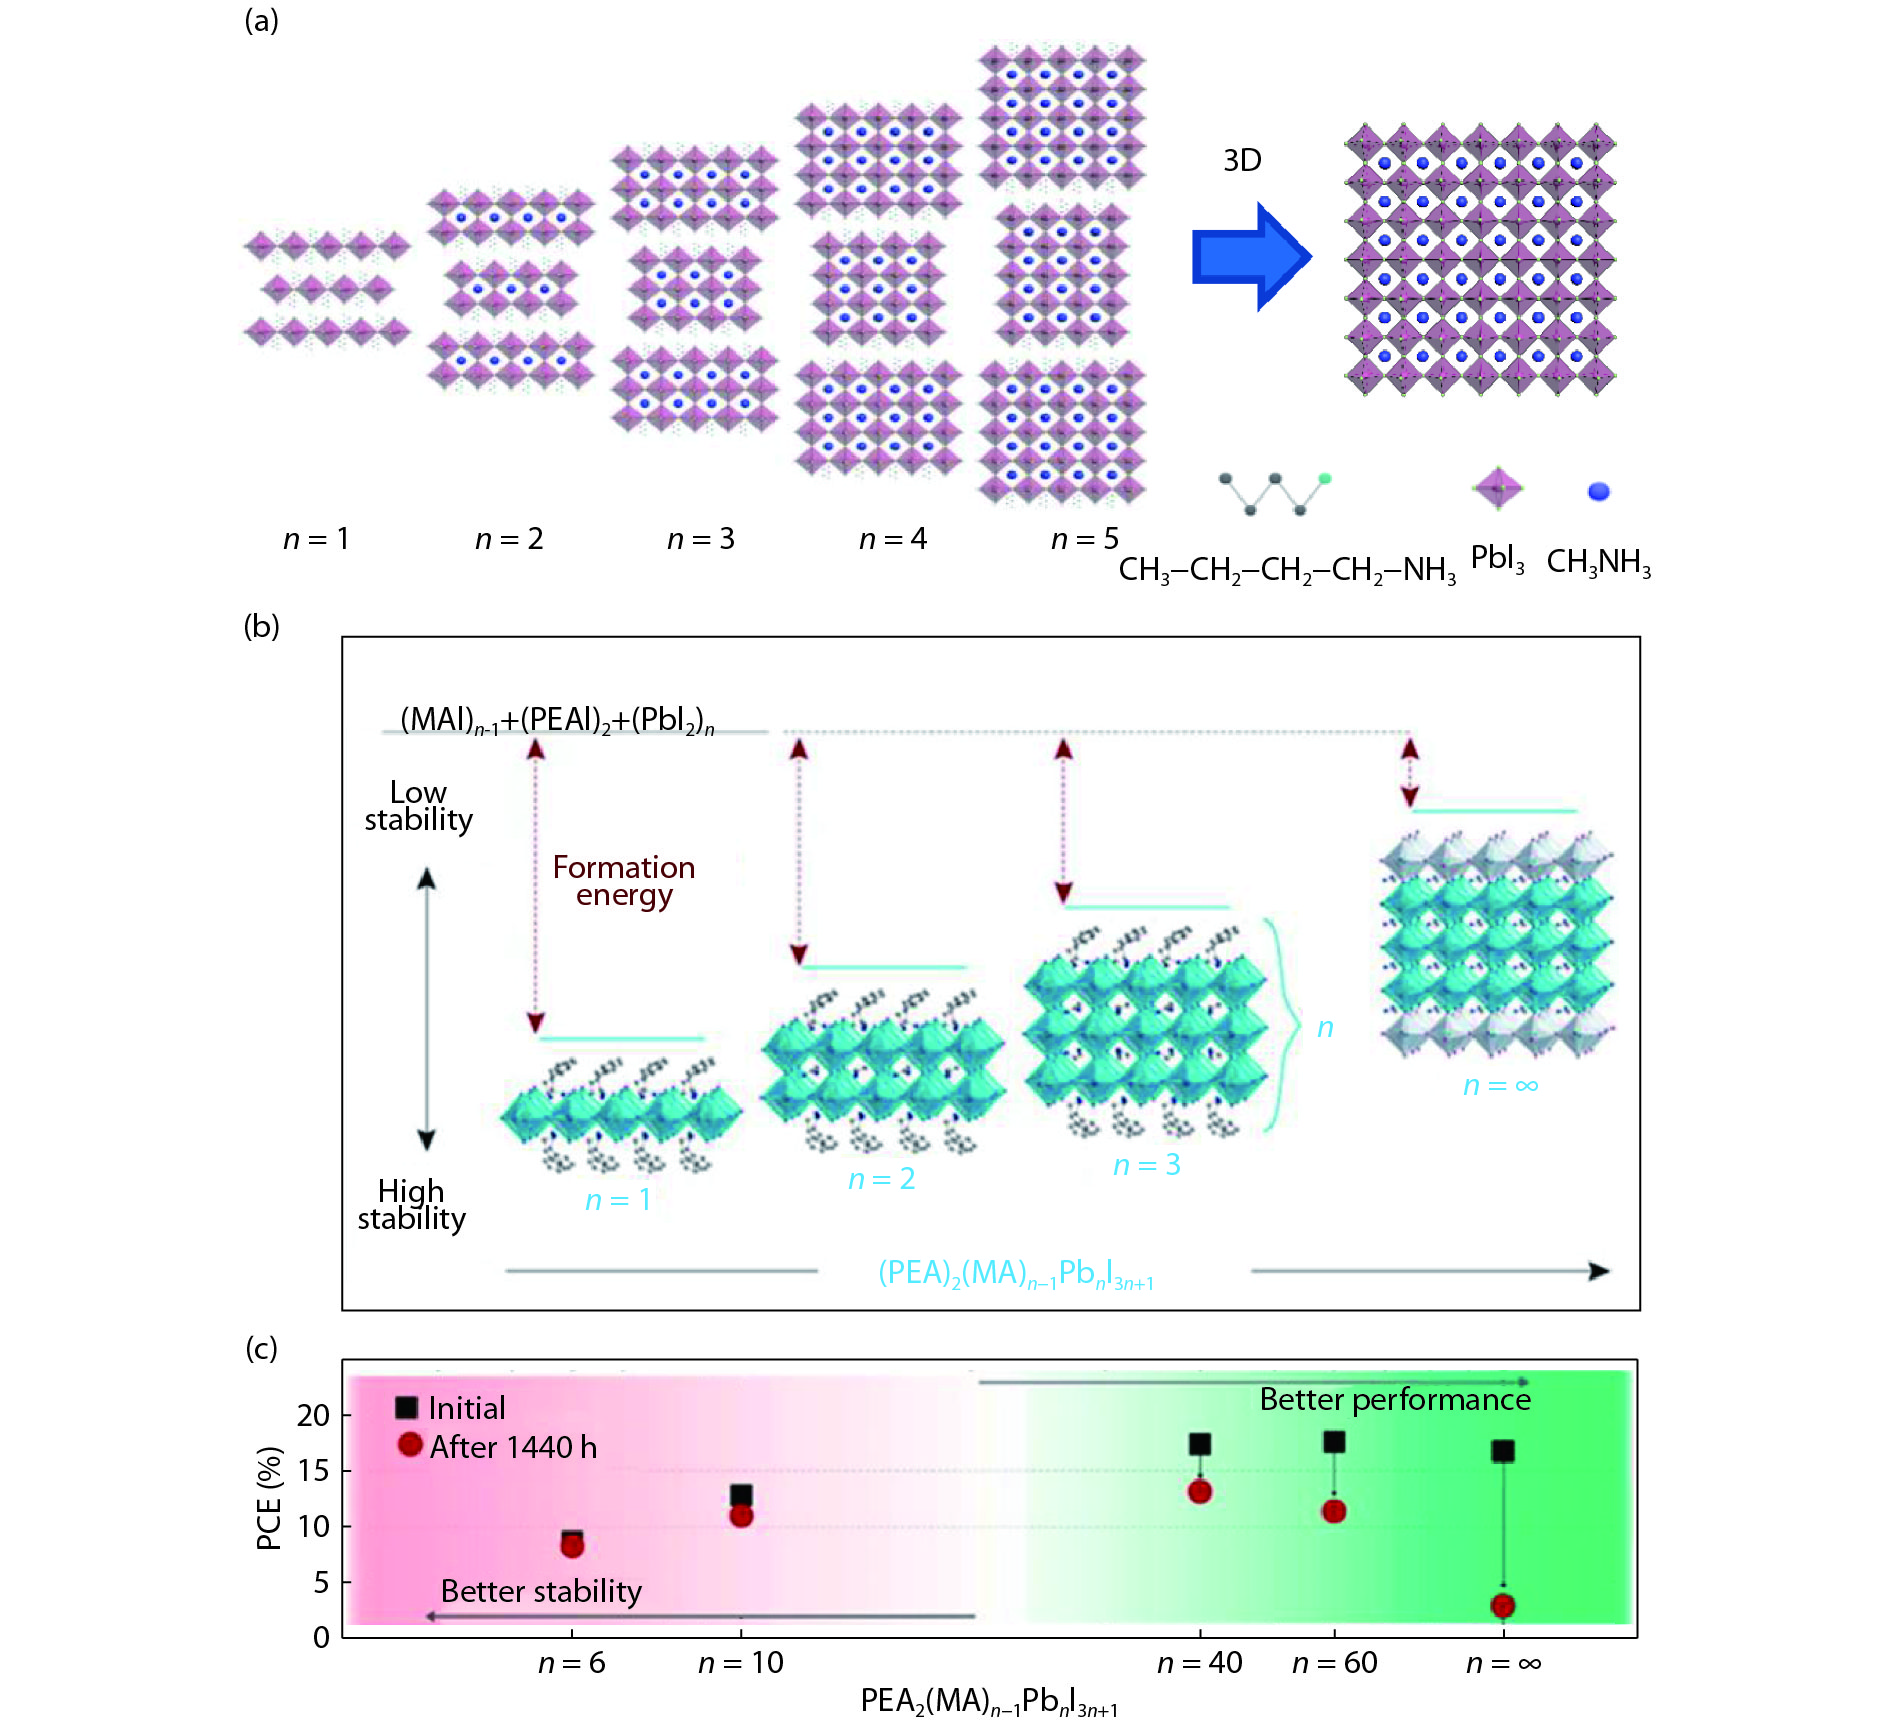 (Color online) (a) The schematic illustration of the crystal structures of 2D perovskite (BA)2(MA)n−1PbnI3n+1 for n = 1 to ∞. (b) The structure schematic illustration and stability of 2D perovskite (PEA)2MAn−1PbnI3n+1 for n = 1 to ∞. (c) The layer number n-dependent power conversion efficiency as well as device performance and stability of (PEA)2MAn−1PbnI3n+1. Panel (a) adapted with permission from Ref. [38]. Copyright 2018, Institute of Physics (Great Britain). Panels (b) and (c) adapted with permission from Ref. [50]. Copyright 2016, American Chemical Society.